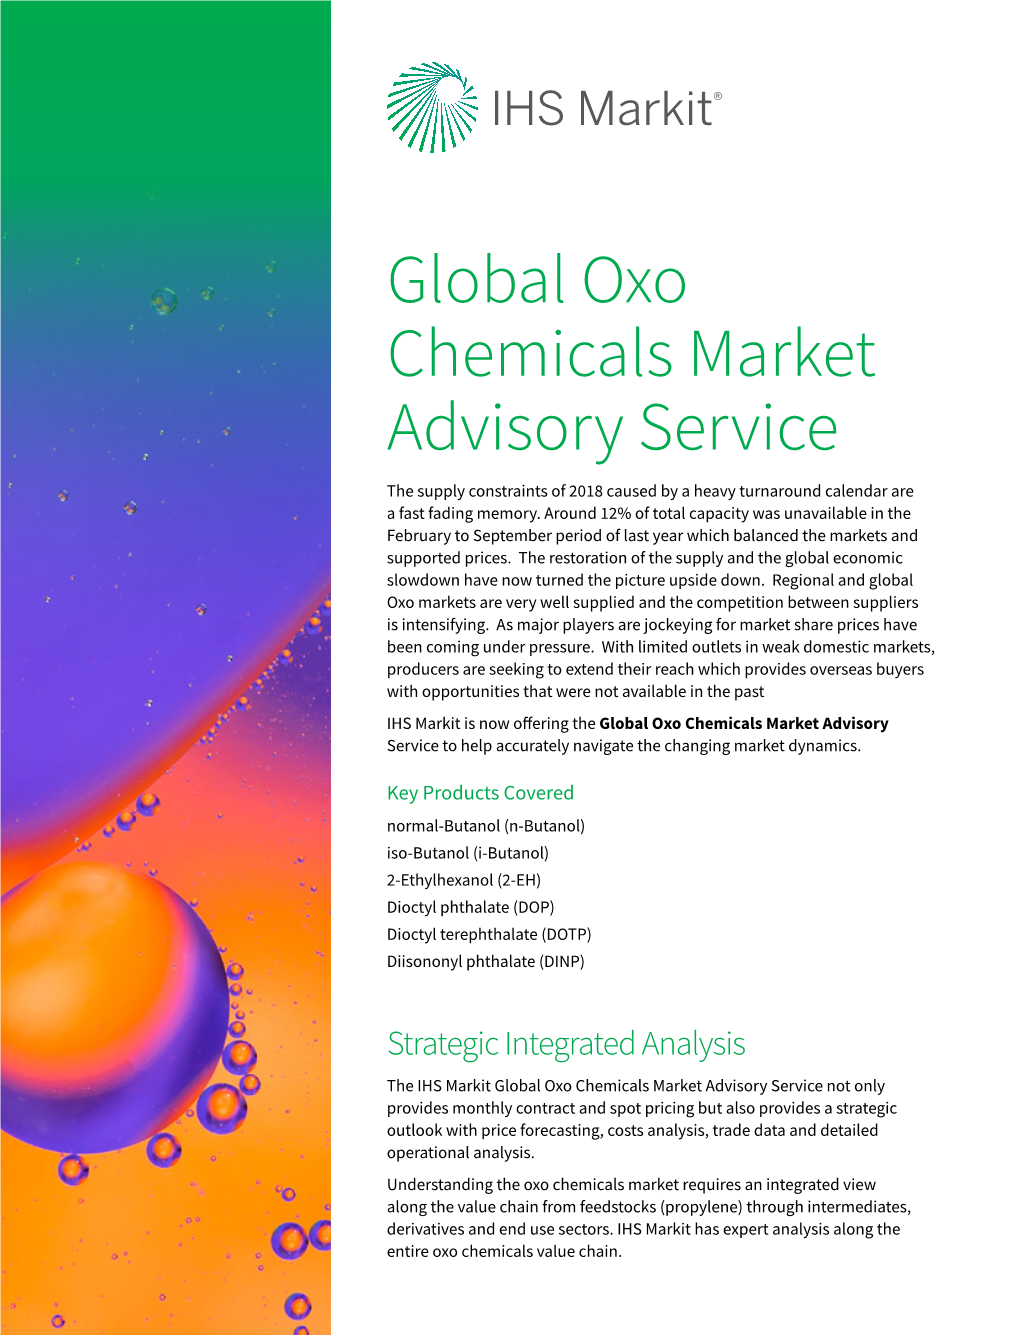 Global Oxo Chemicals Market Advisory Service the Supply Constraints of 2018 Caused by a Heavy Turnaround Calendar Are a Fast Fading Memory